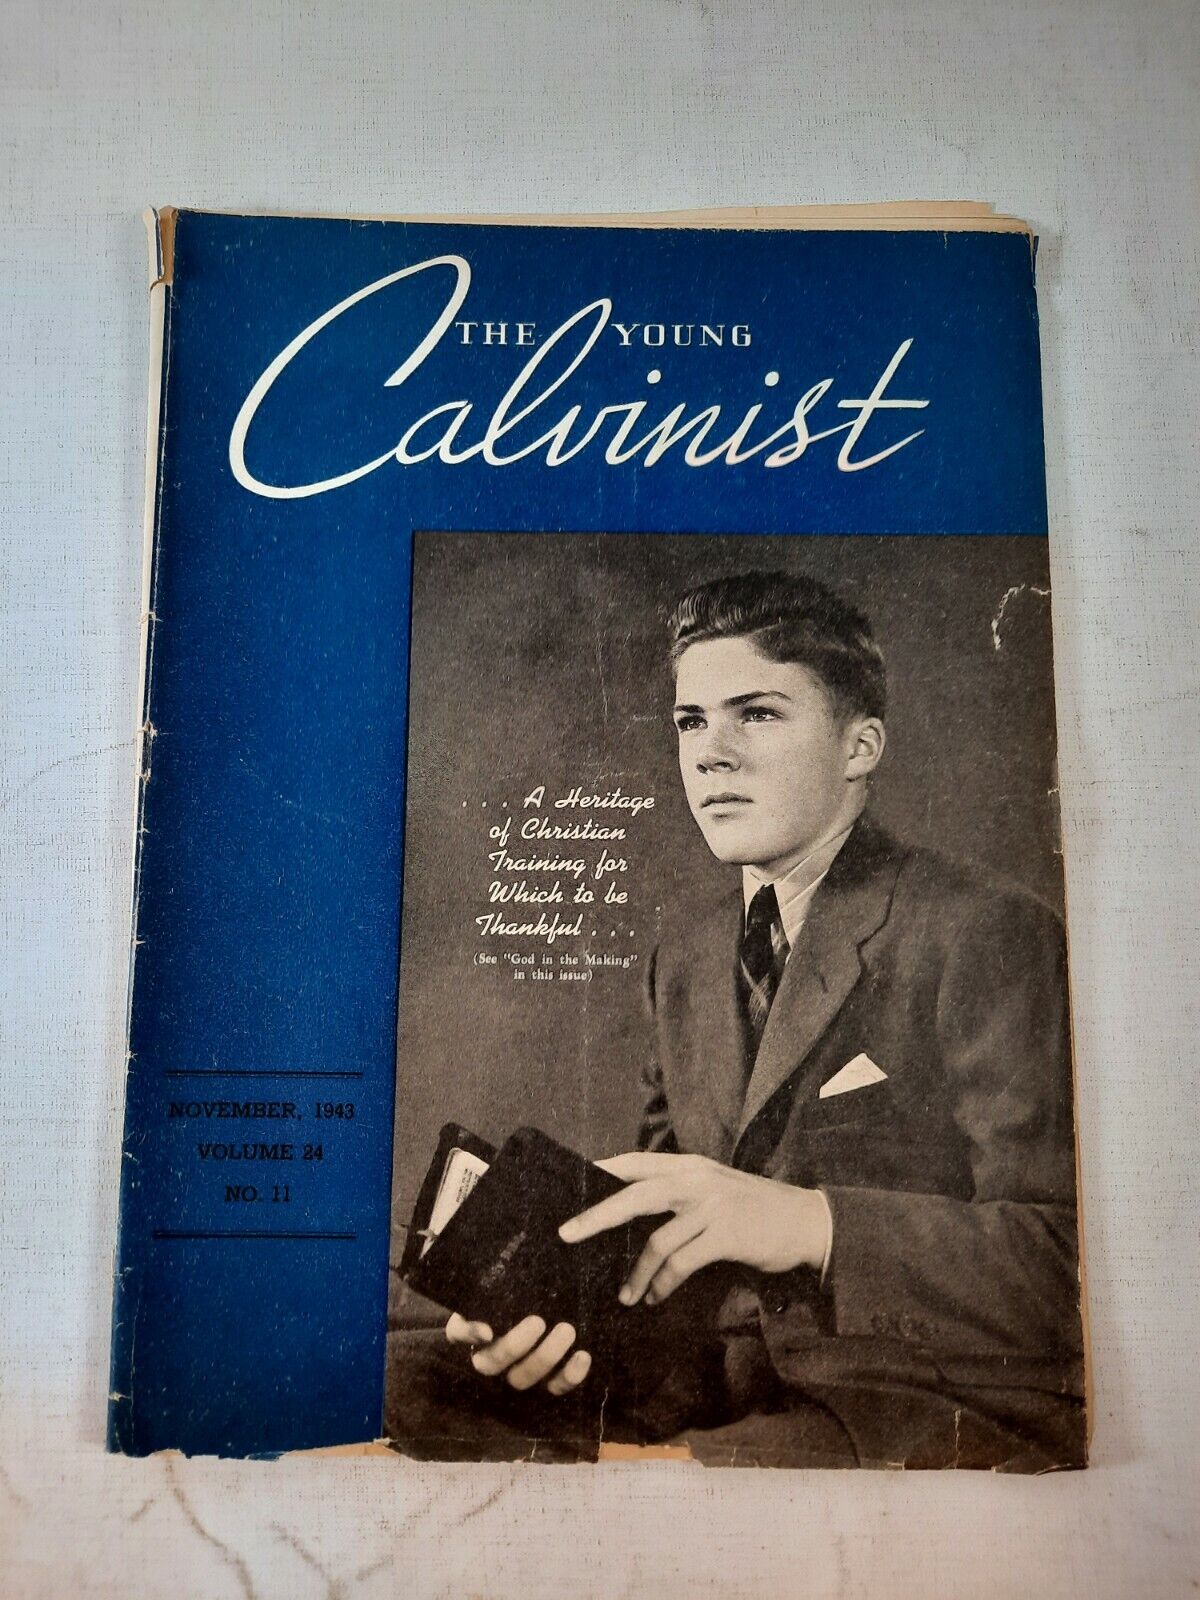 Vintage The Young Calvinist  Magazine November 1943 Volume 24. Loose pages 